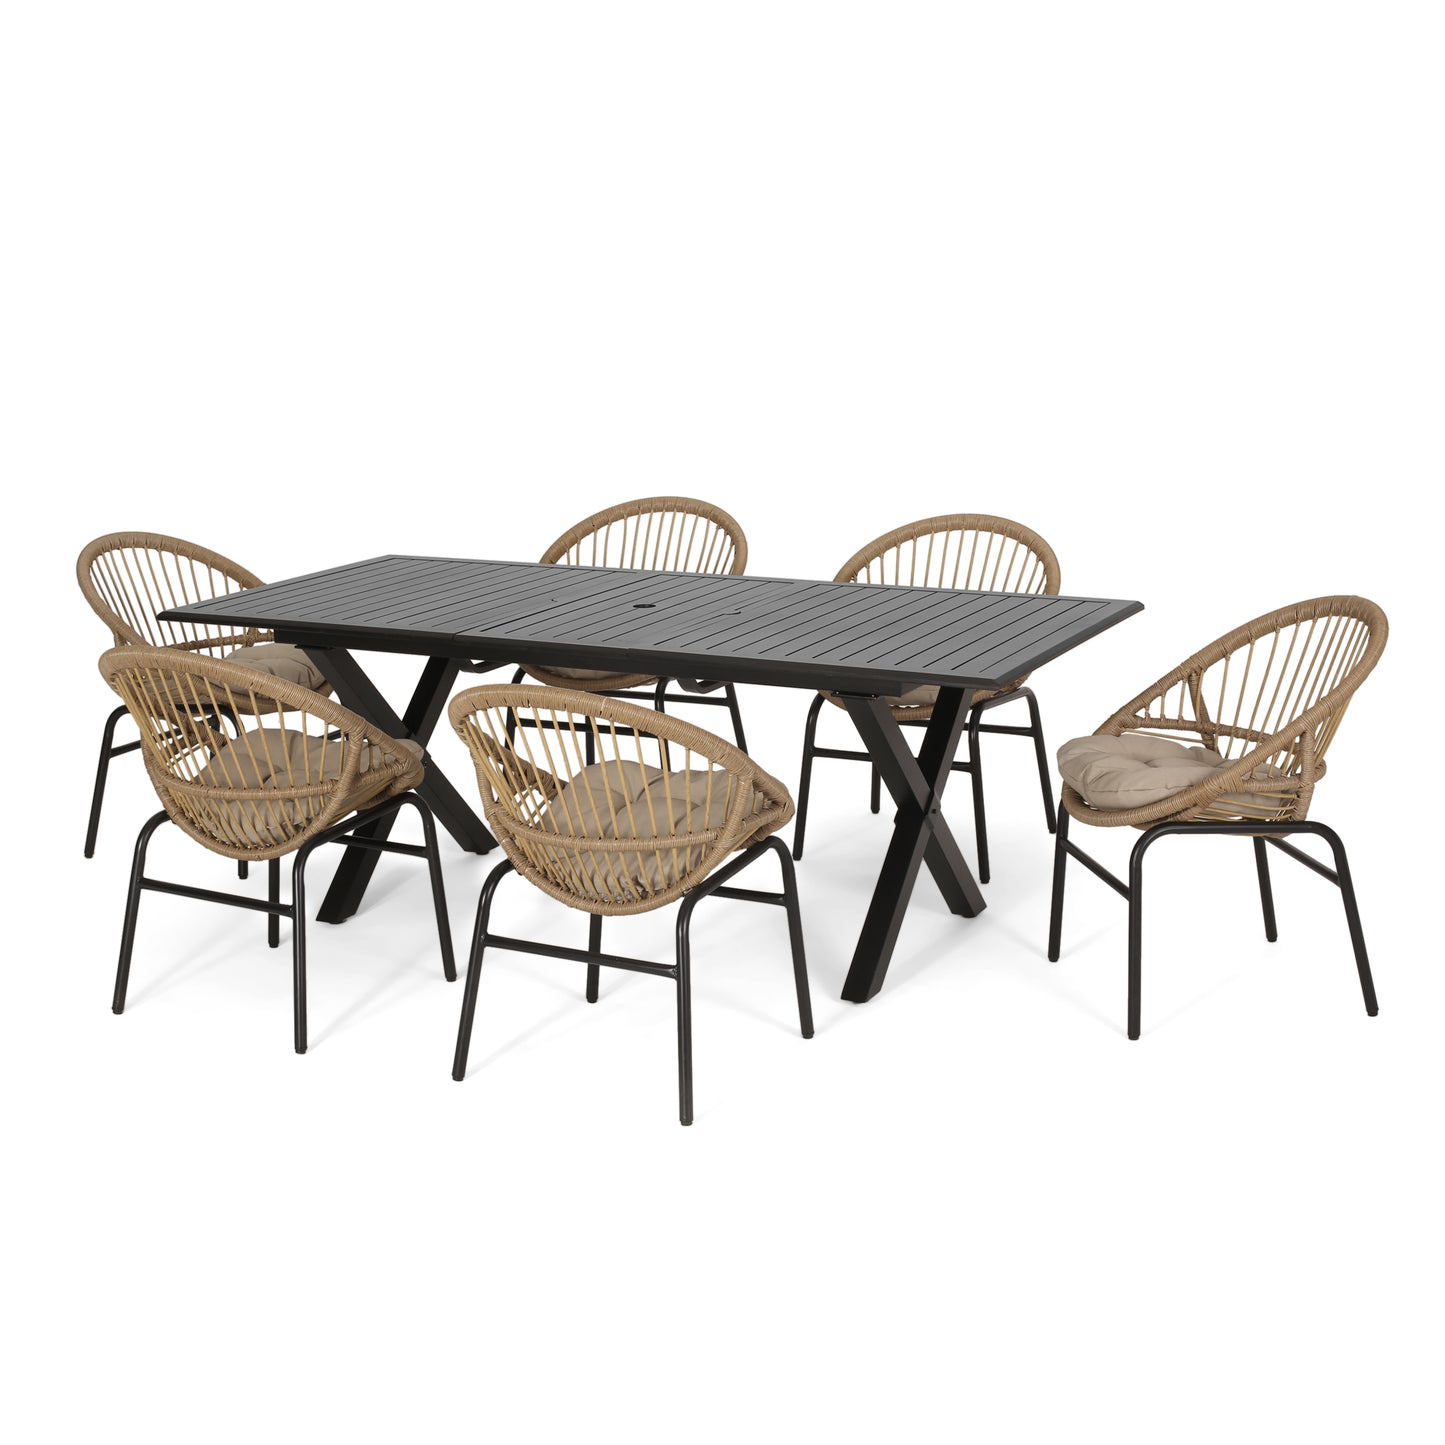 Benway Outdoor Wicker and Aluminum 7 Piece Expandable Dining Set with Cushion, Light Brown, Beige, and Black